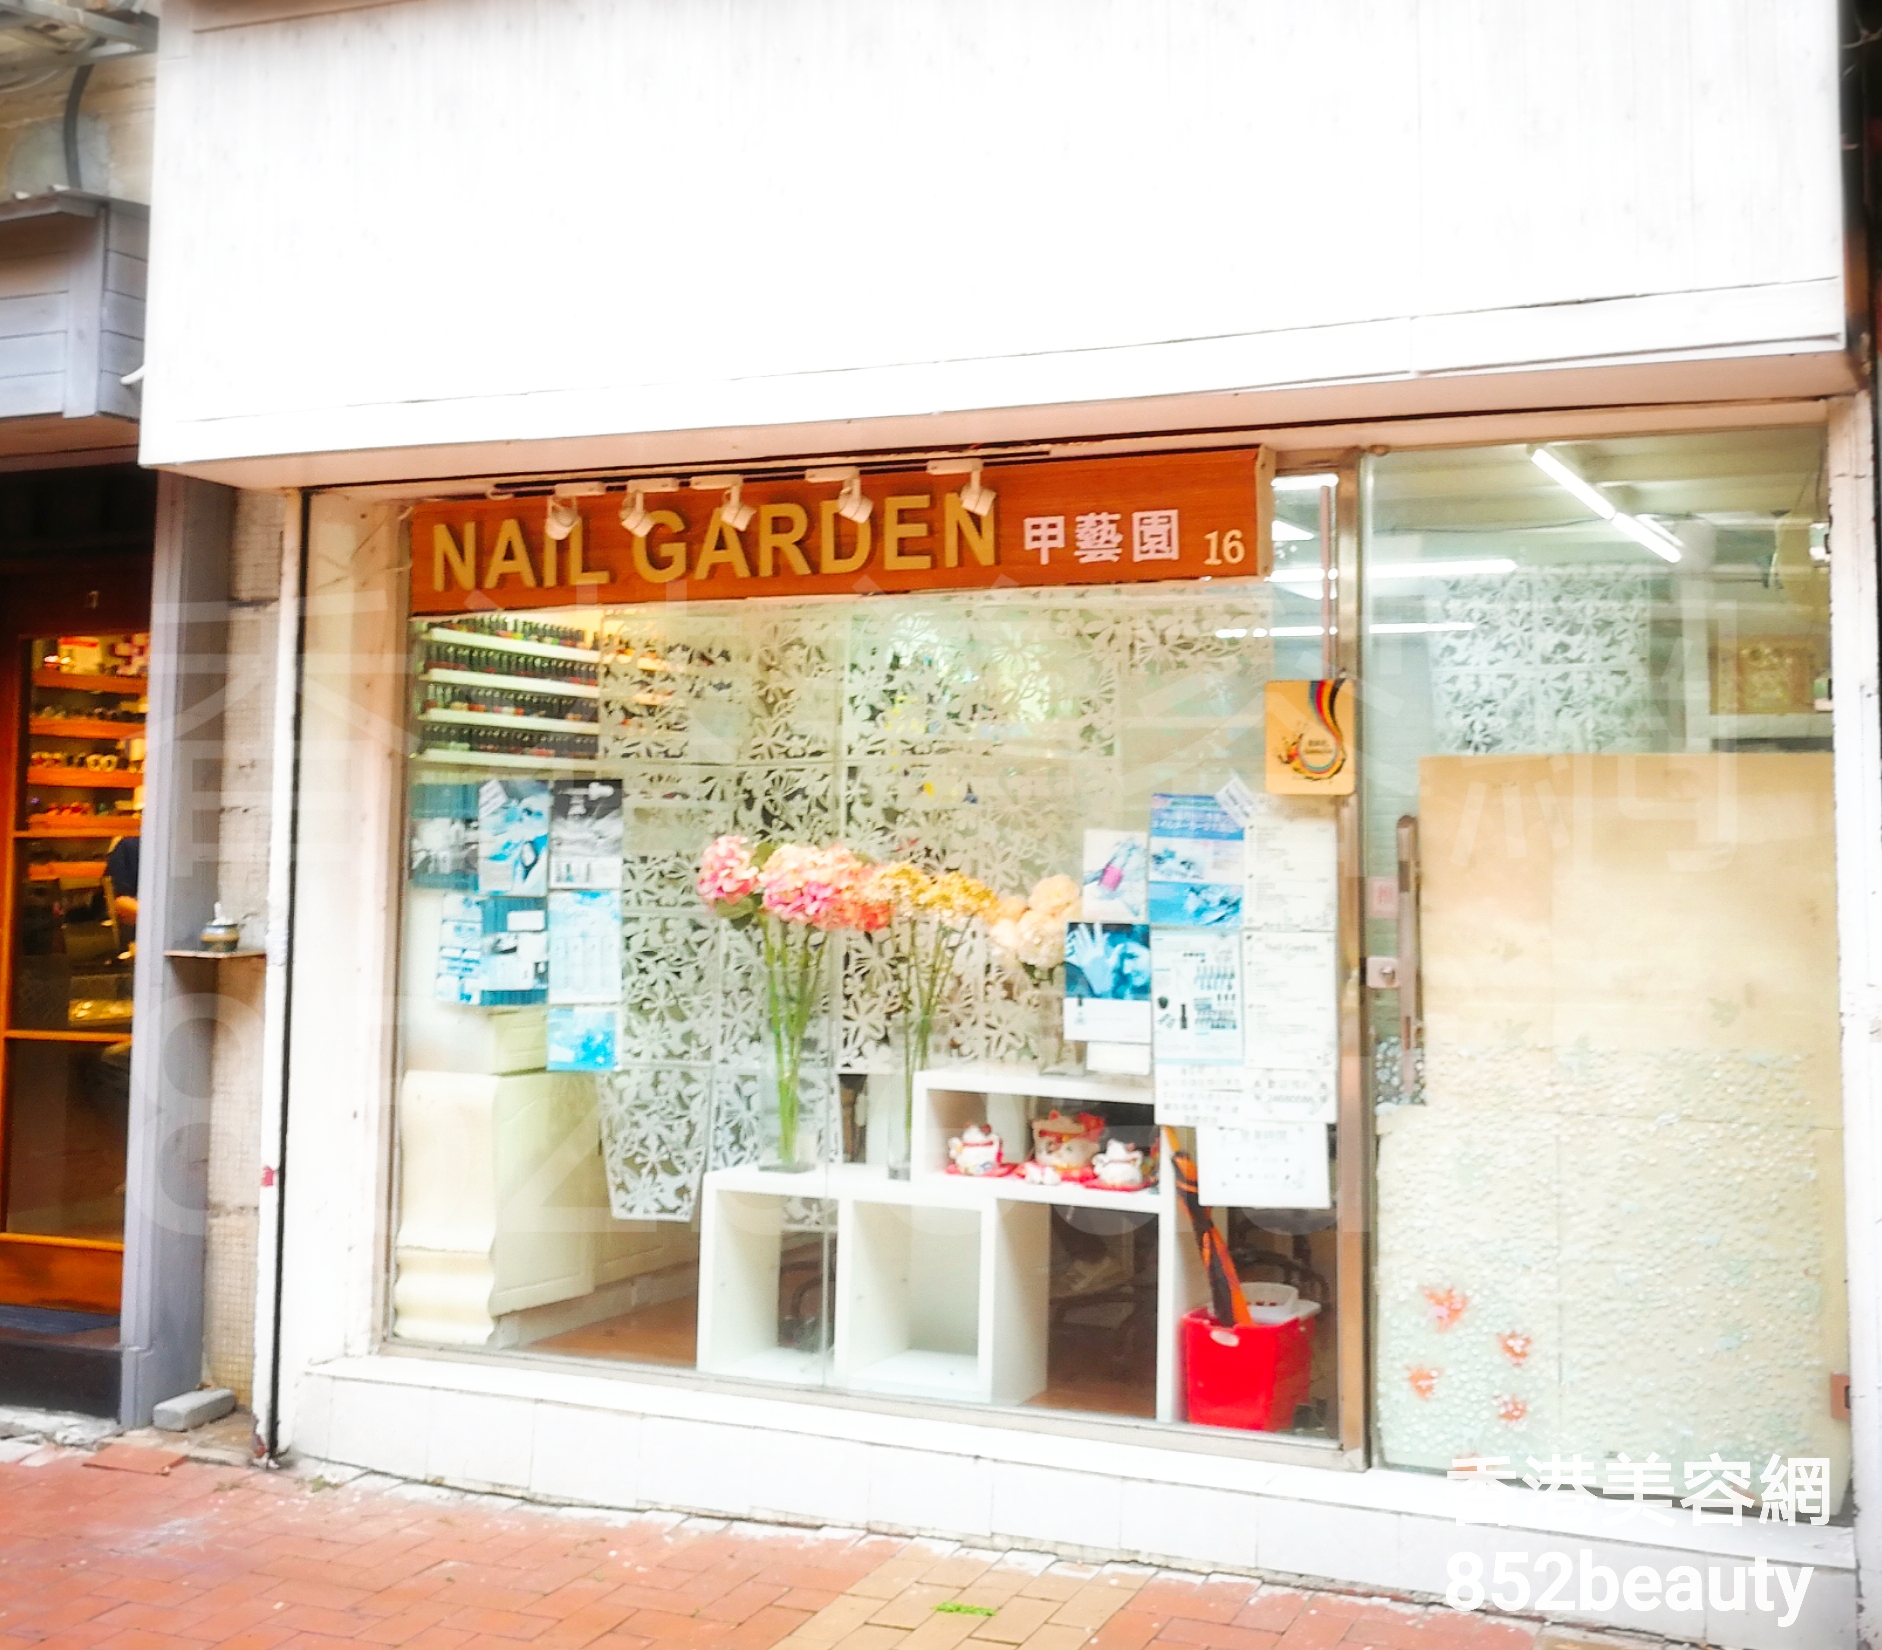 Hand and foot care: Nail Garden 甲藝園